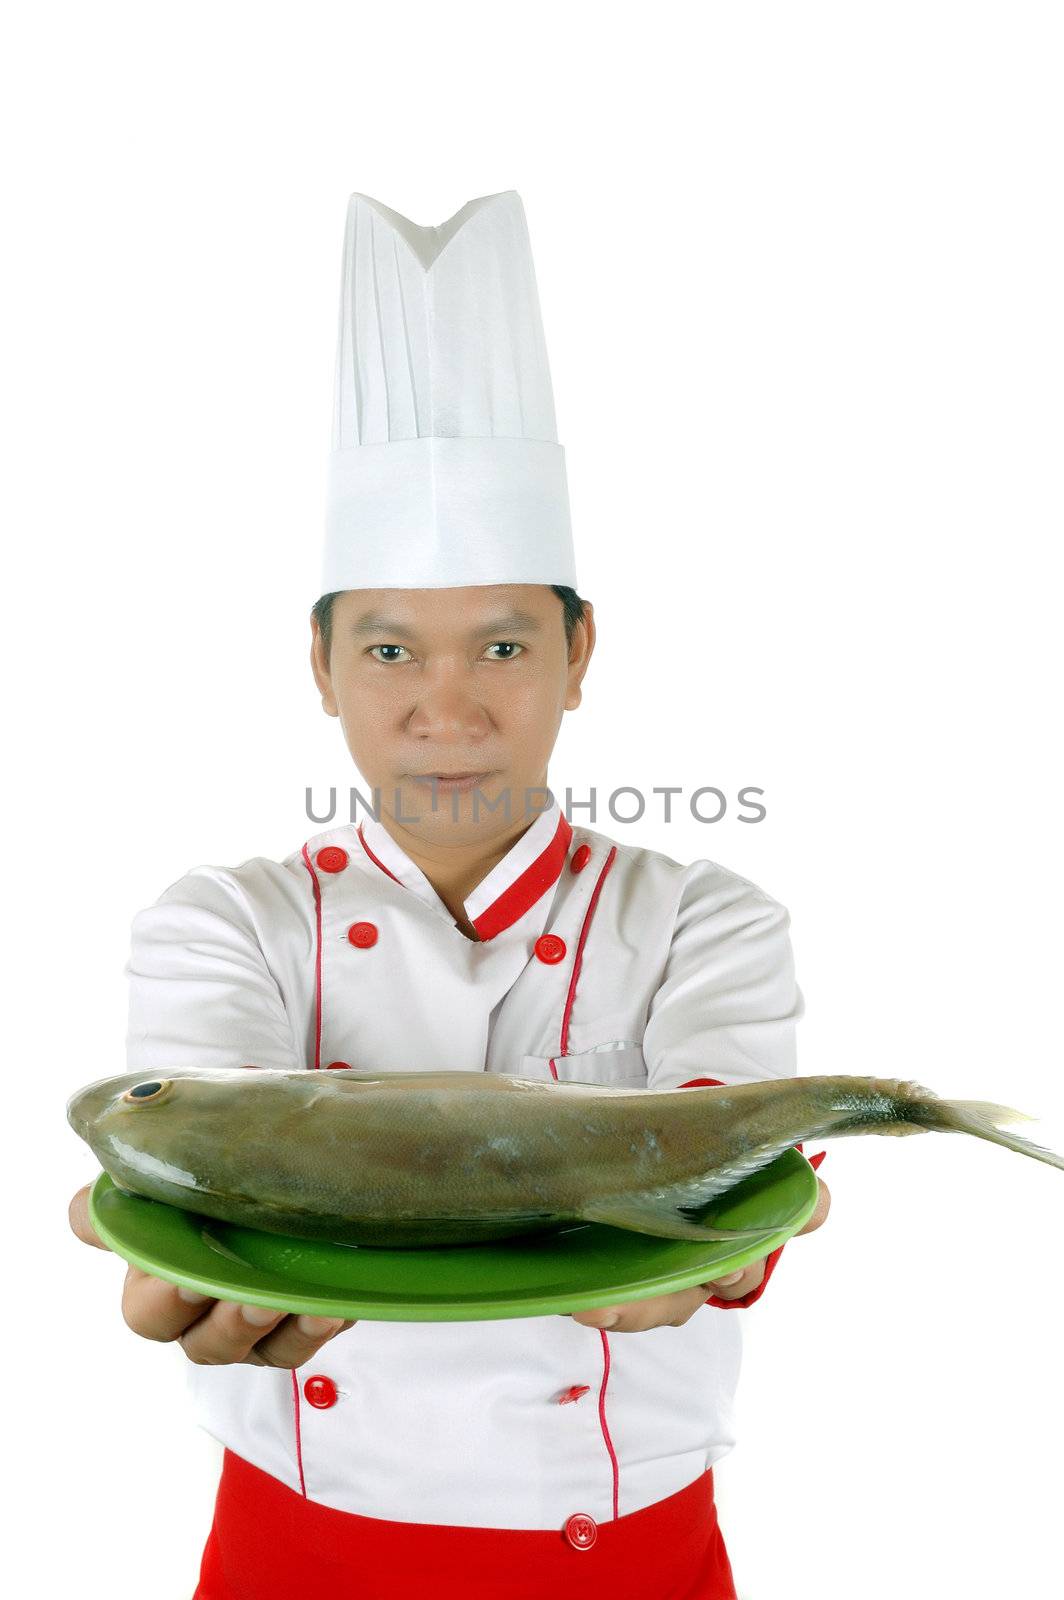 chef holding raw fish on a green plate isolated on white background